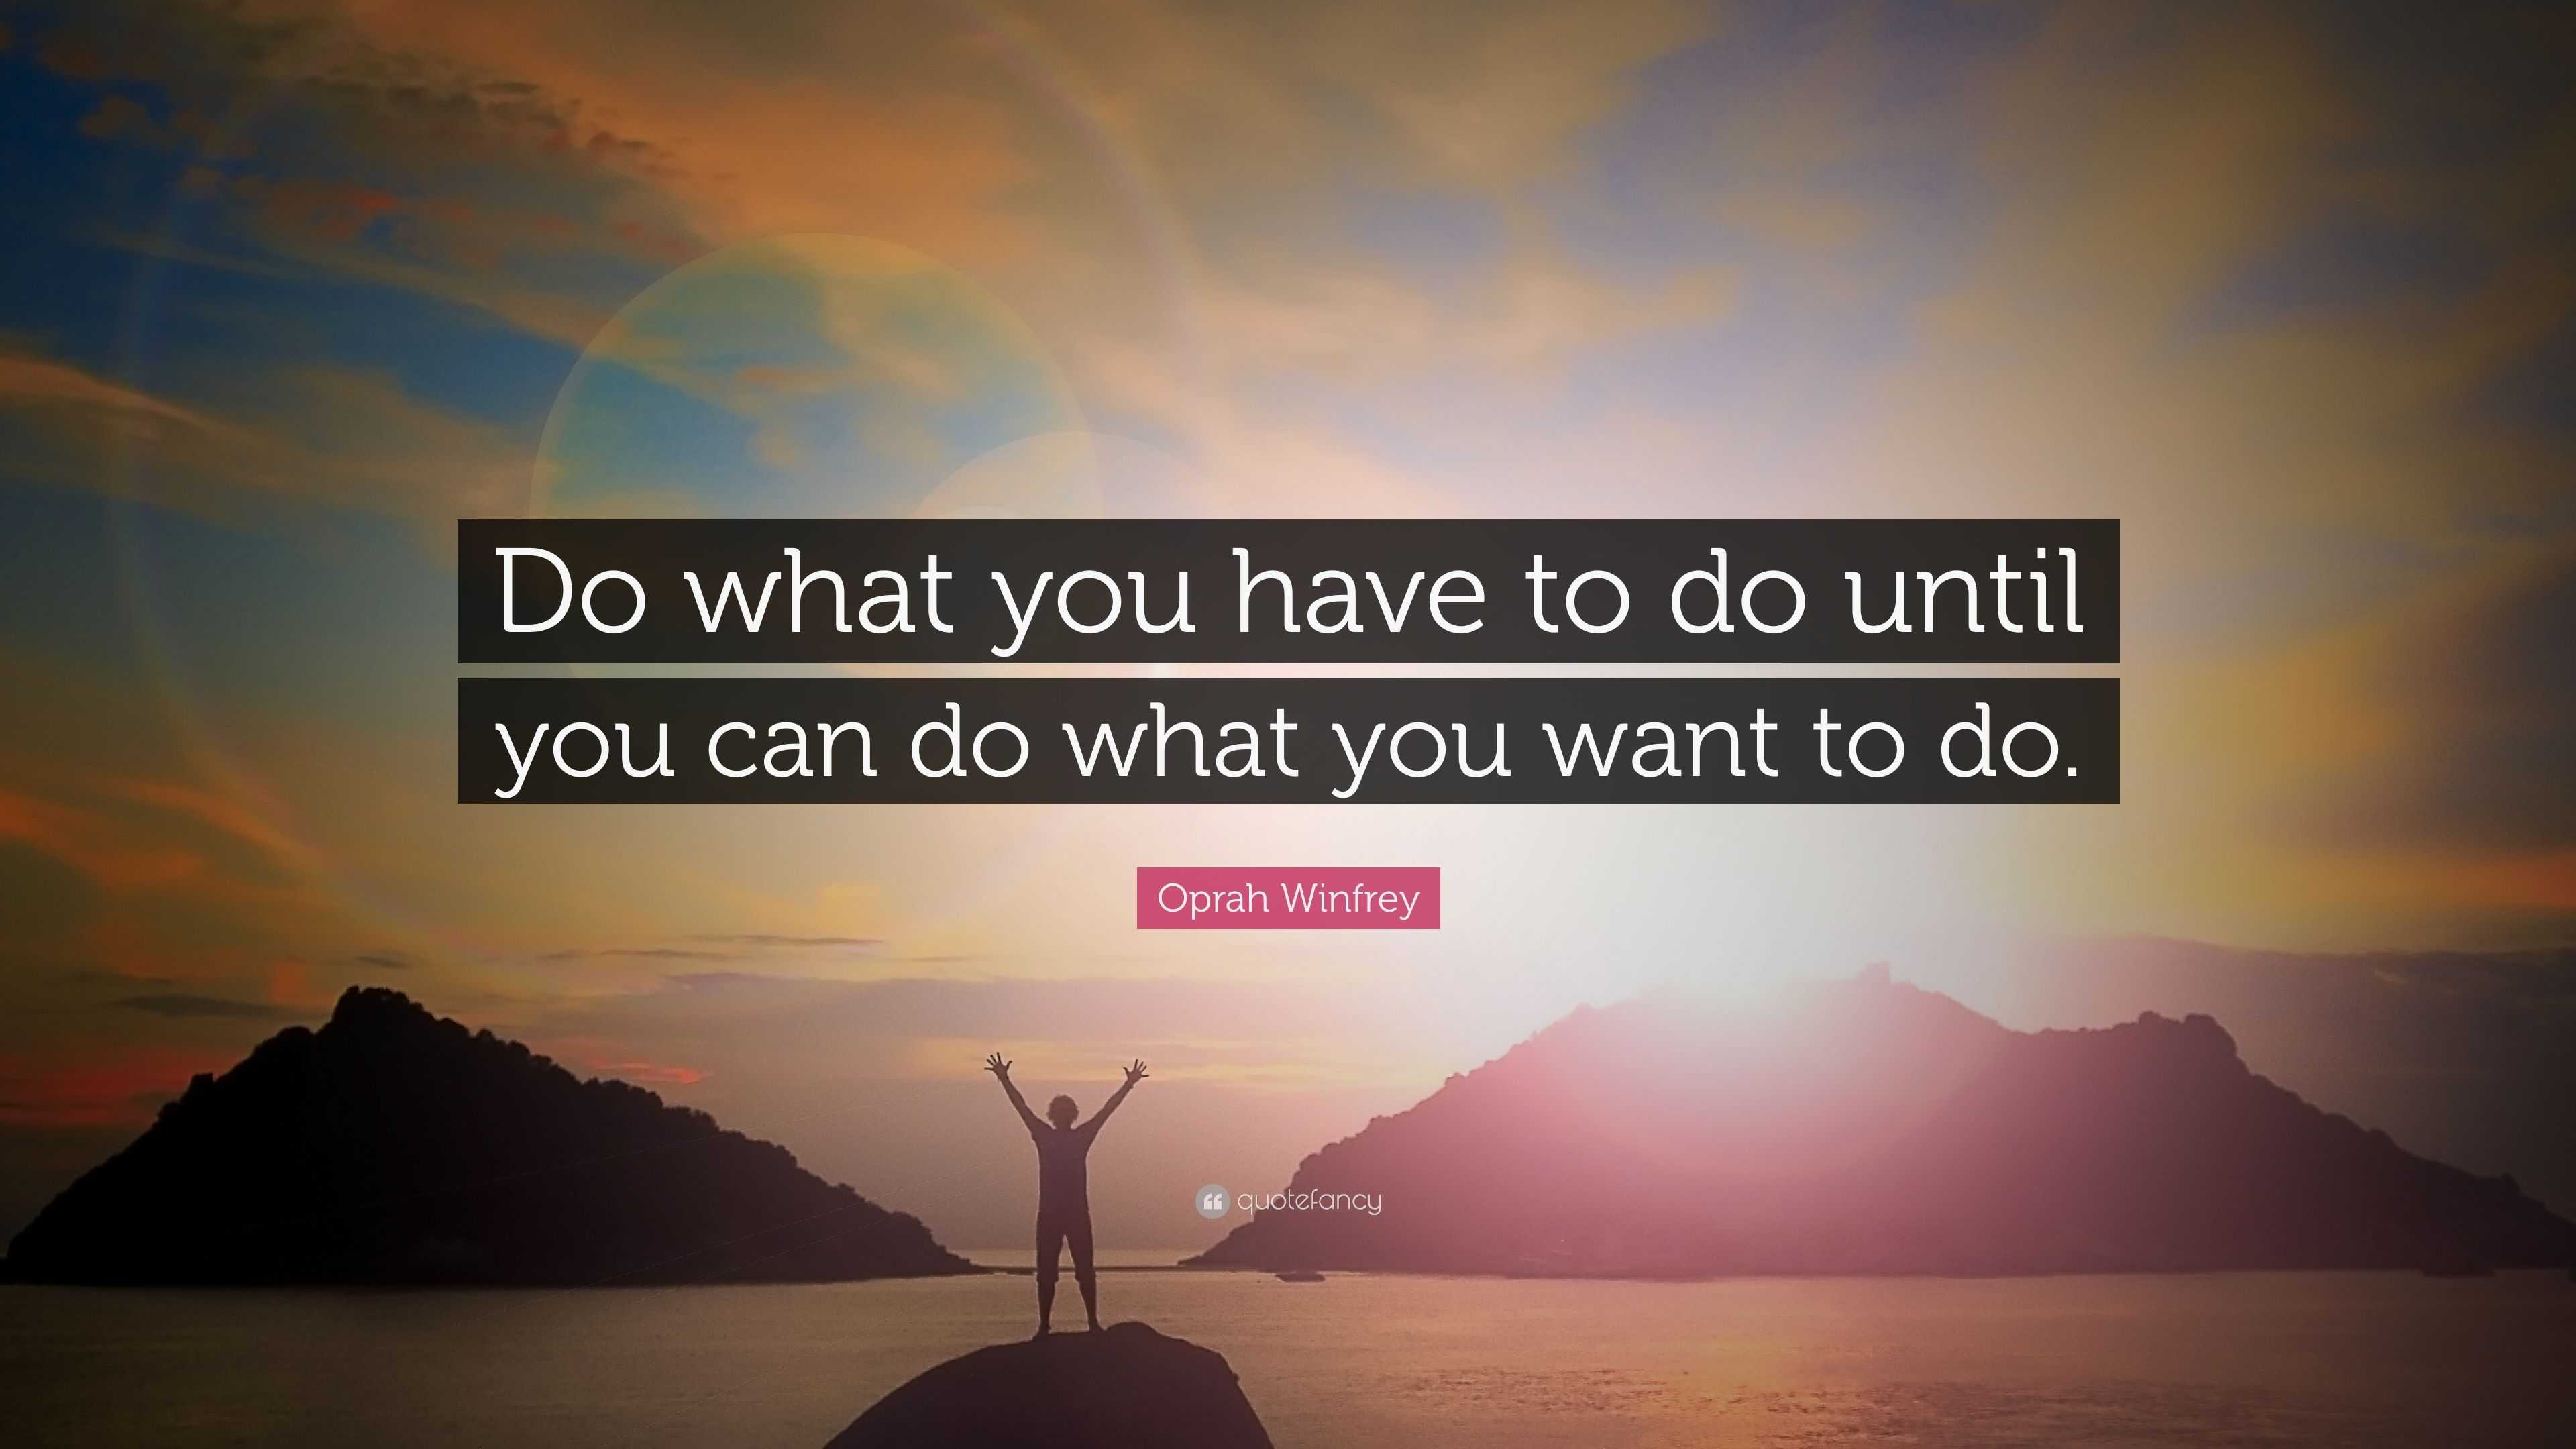 Oprah Winfrey Quote: “Do what you have to do until you can do what you